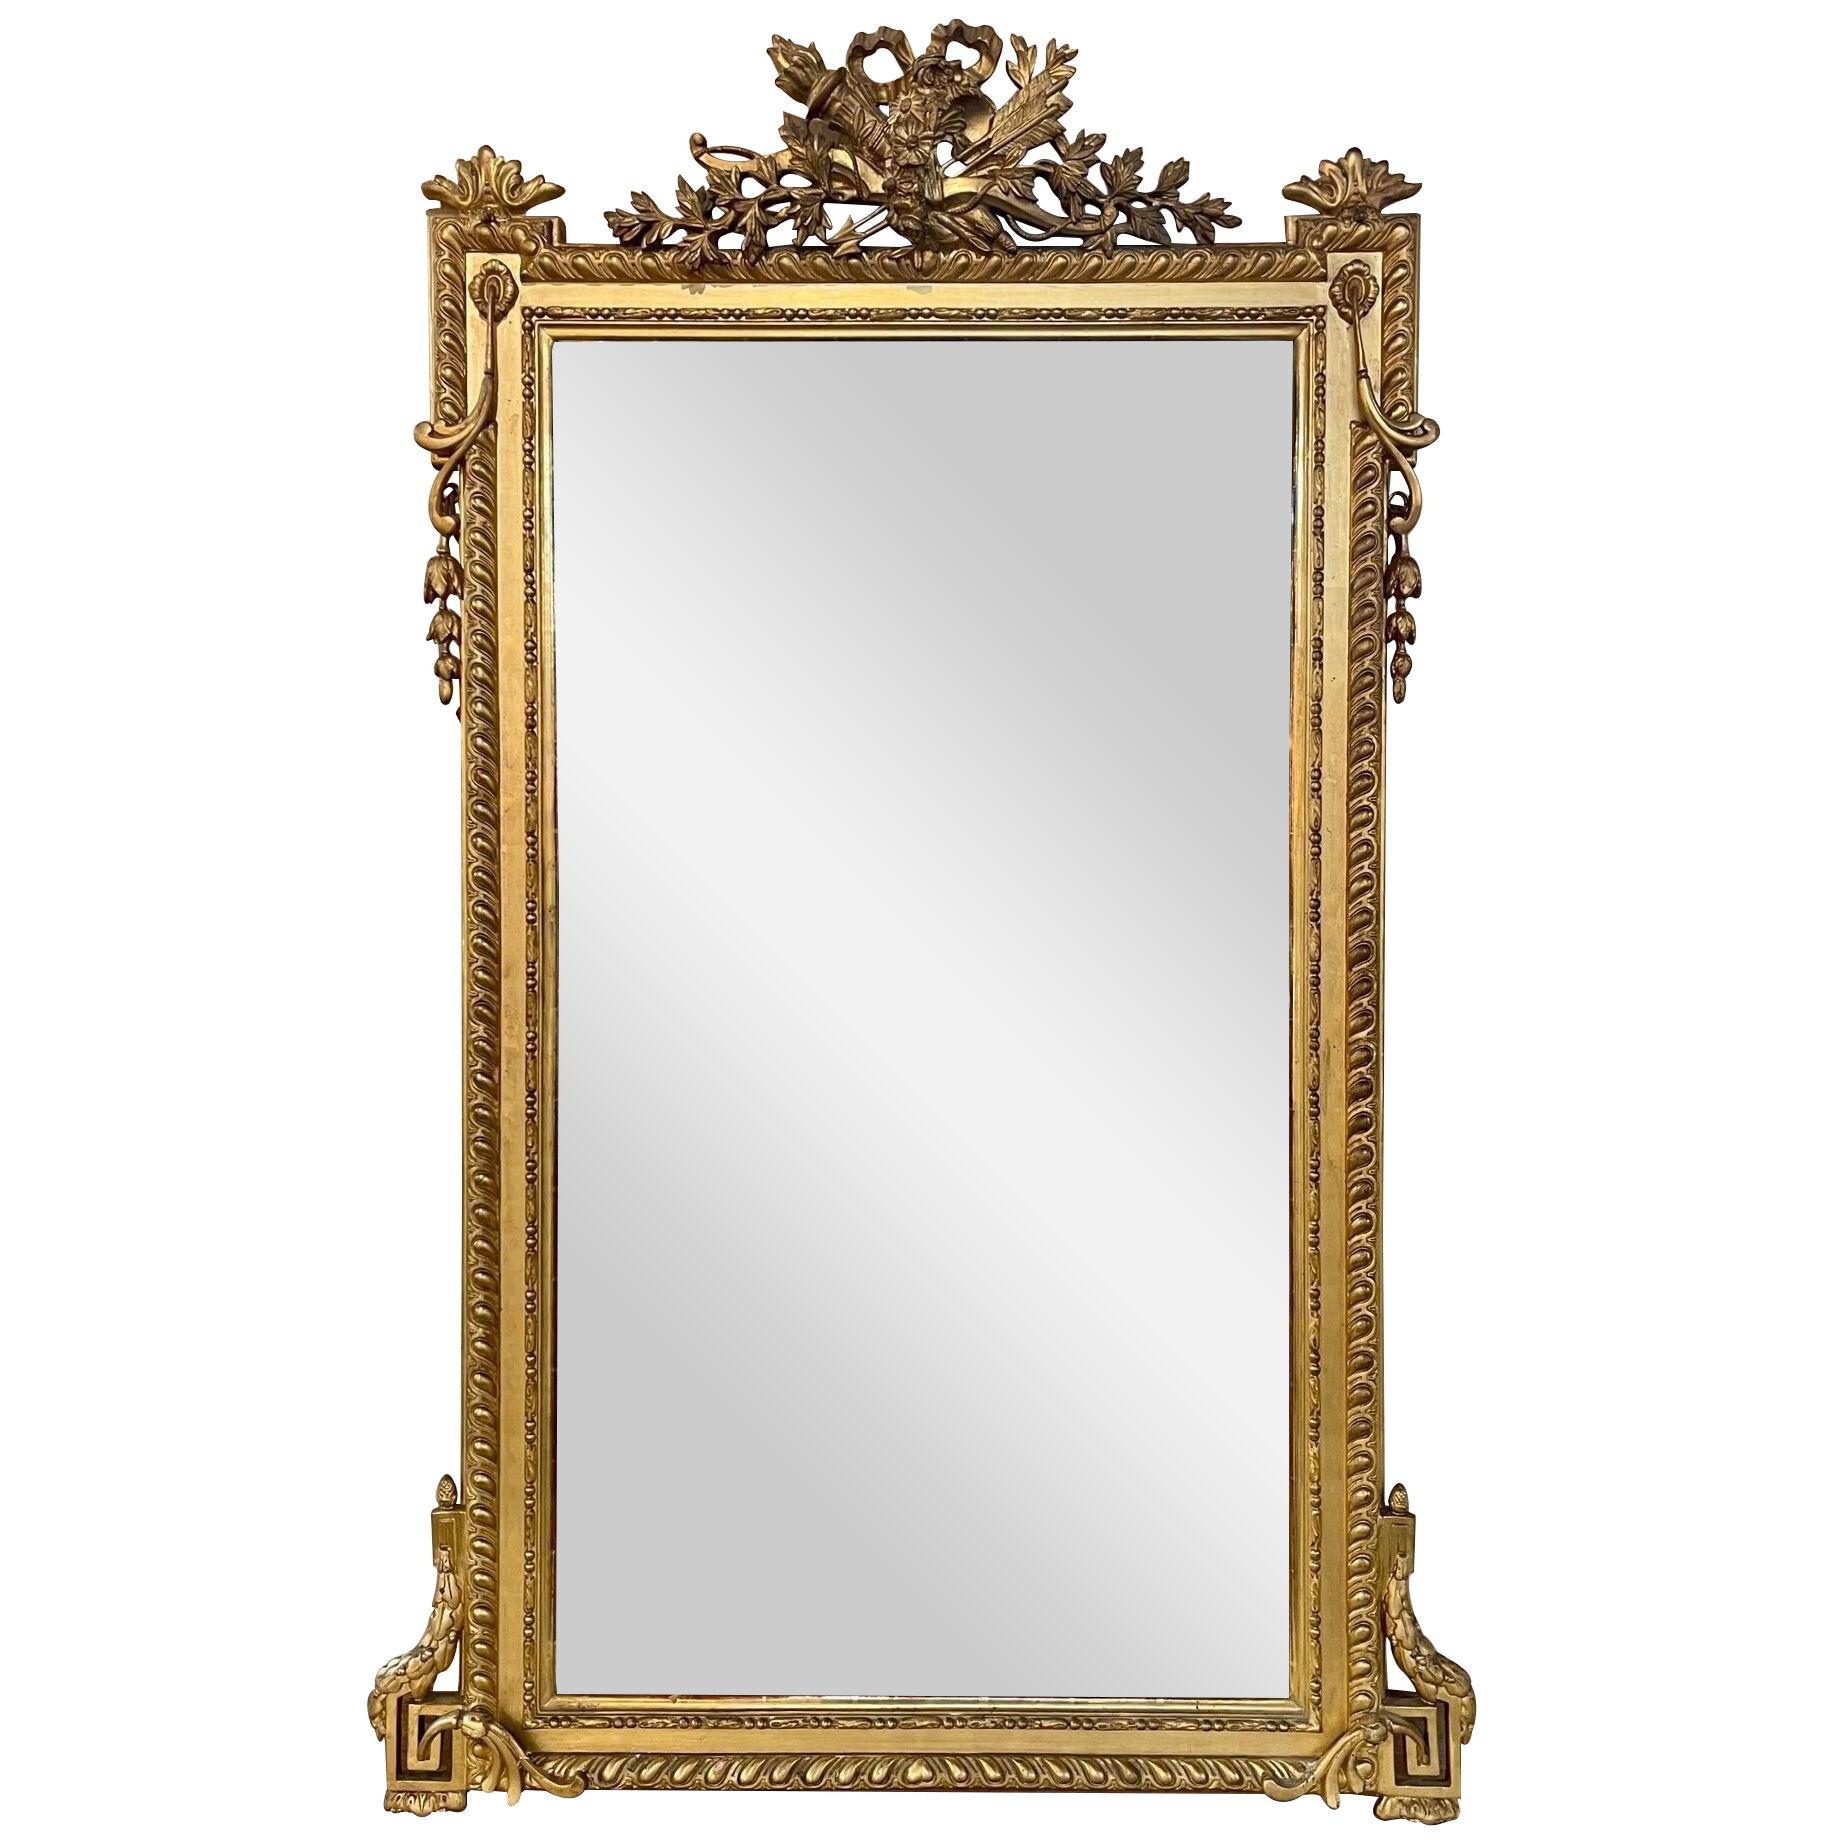 19th Century French Carved and Giltwood Louis XVI Style Mirror